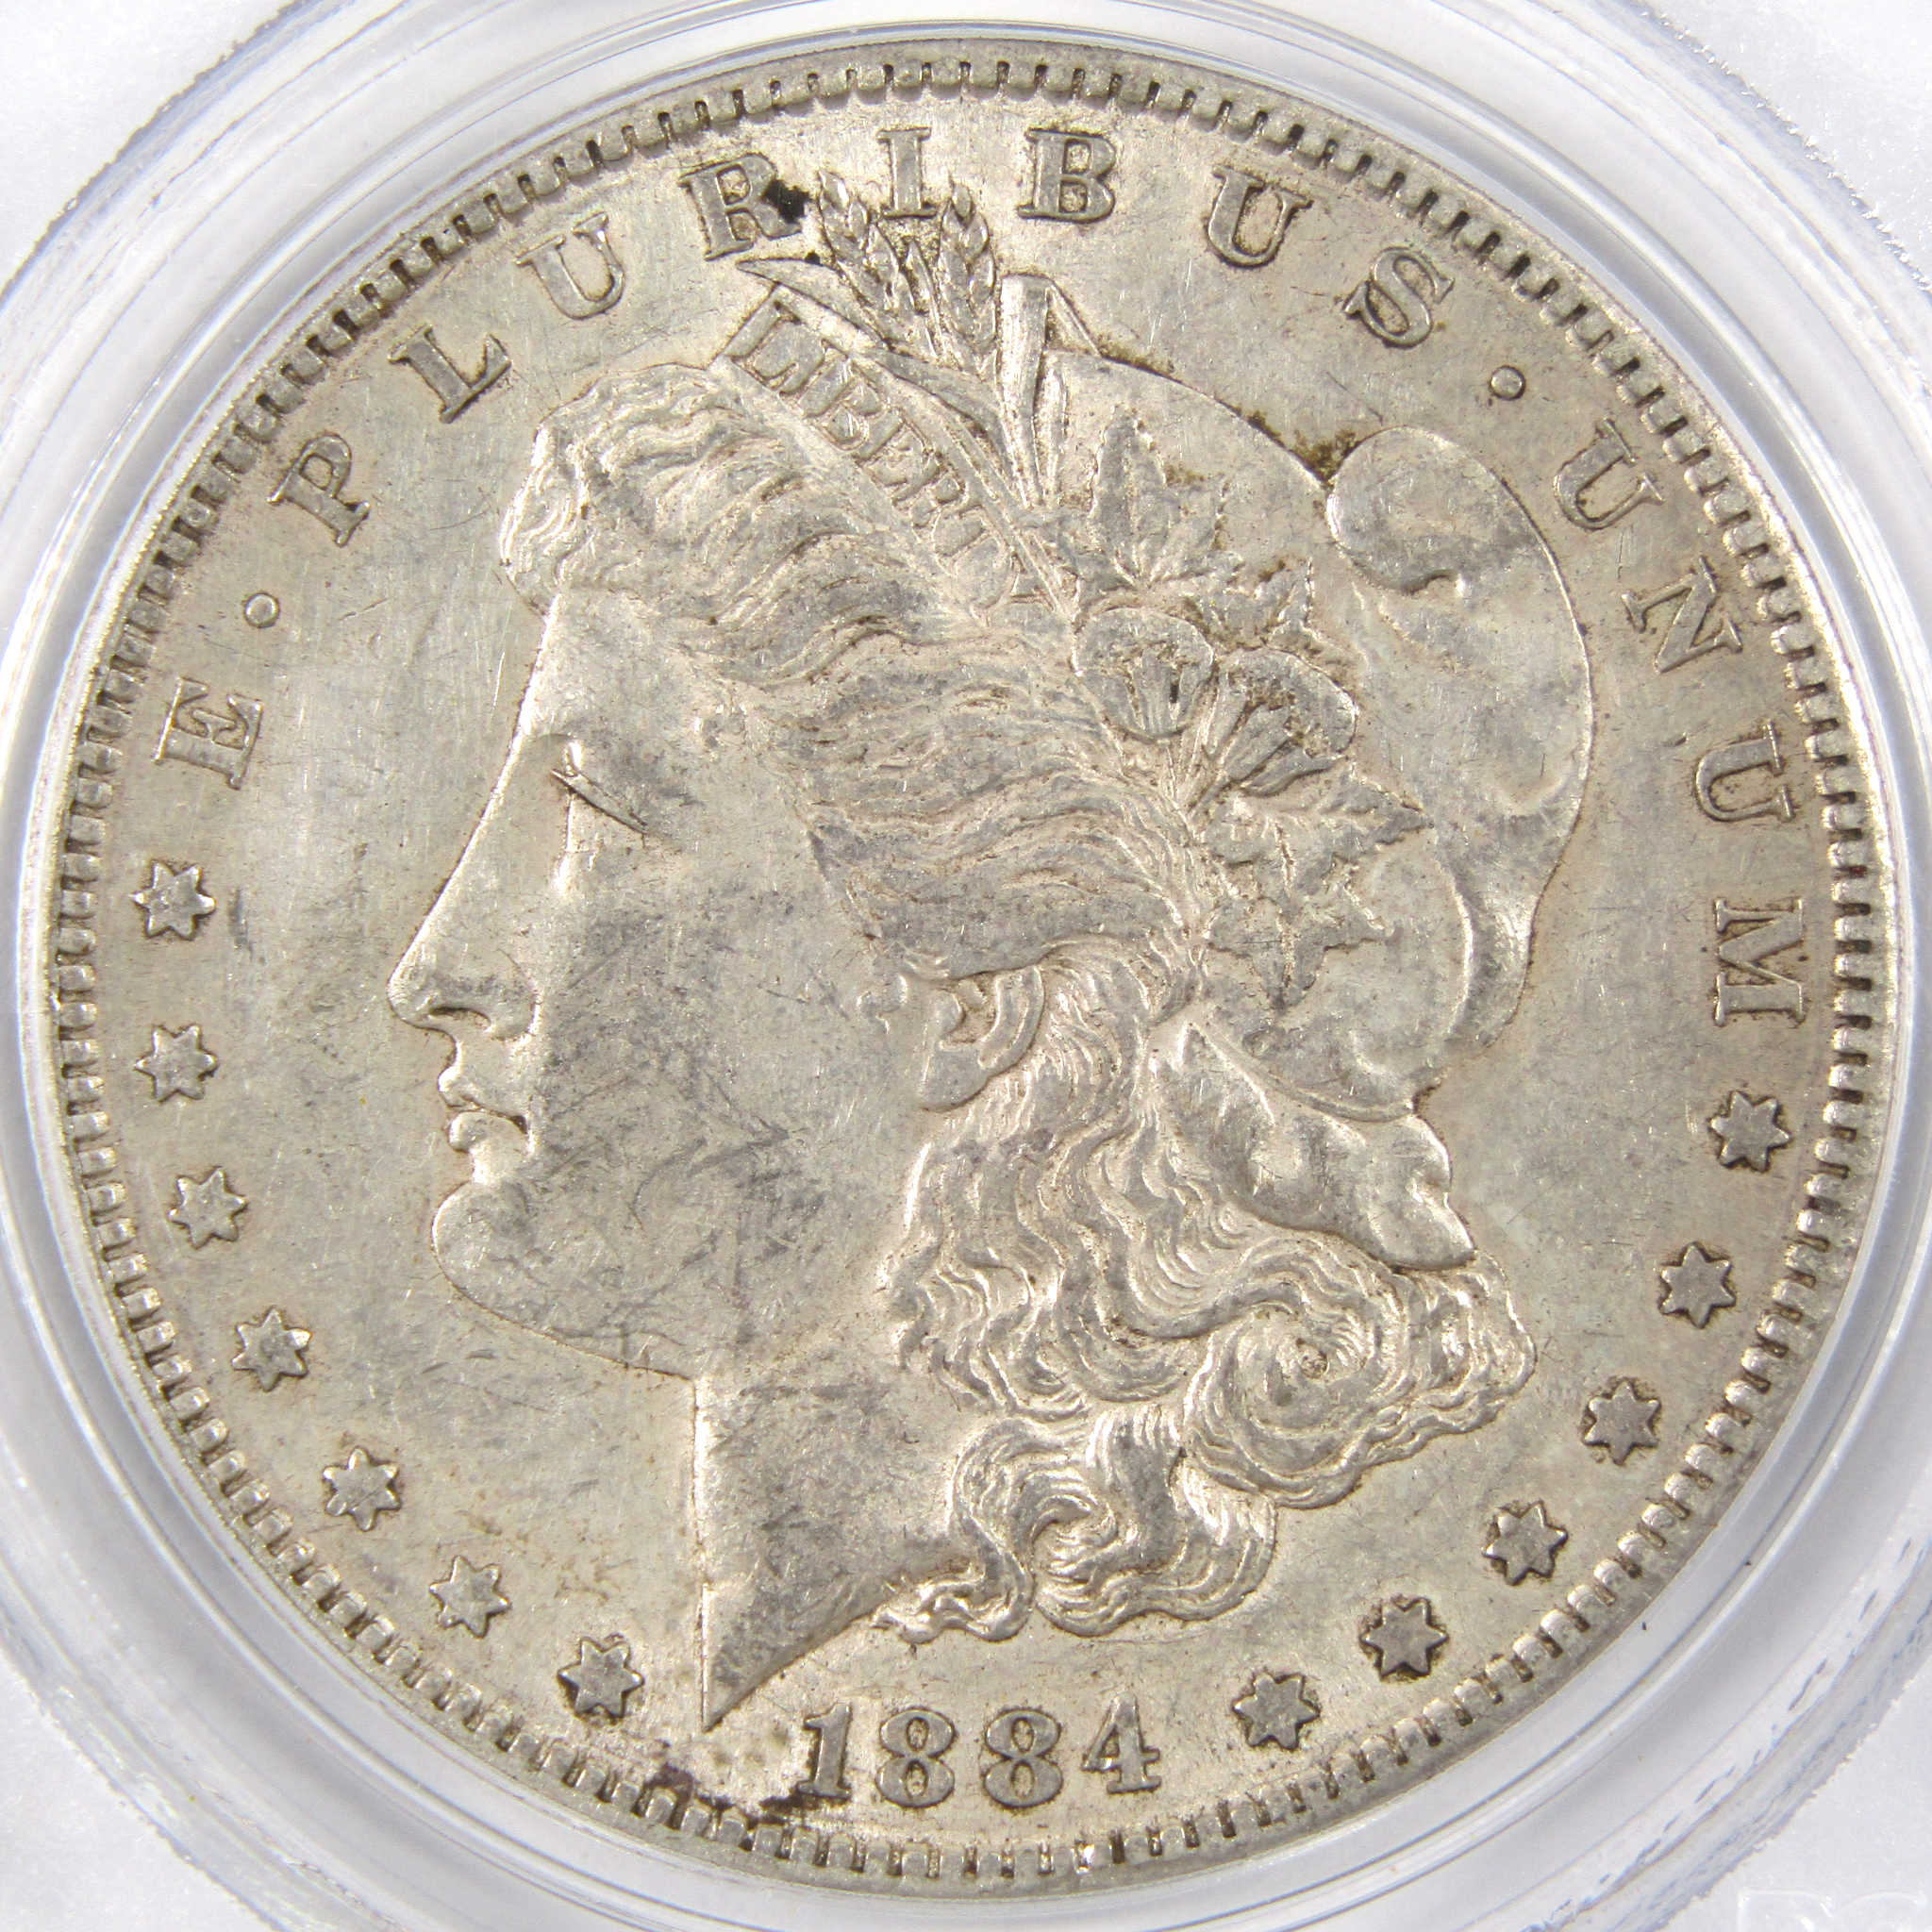 1884 S Morgan Dollar AU 53 PCGS 90% Silver $1 Coin SKU:I9610 - Morgan coin - Morgan silver dollar - Morgan silver dollar for sale - Profile Coins &amp; Collectibles